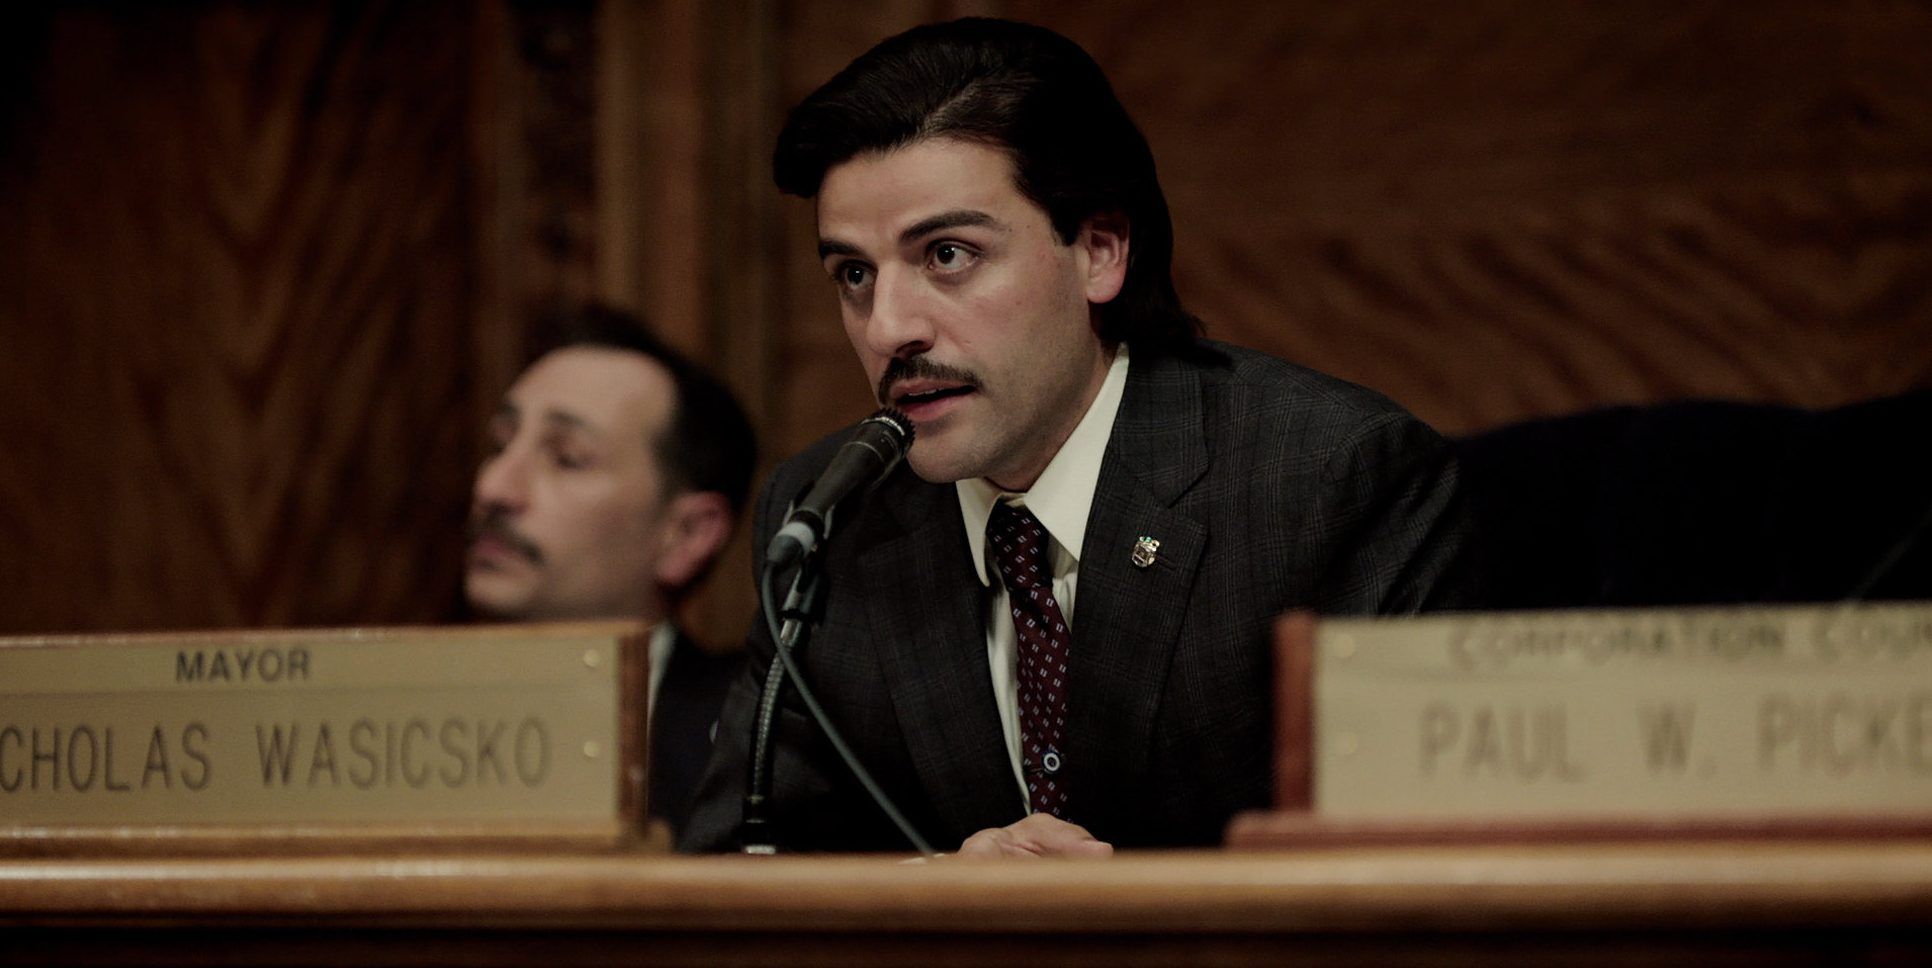 Scenes From A Marriage Still Doesn’t Top Oscar Isaac’s Most Overlooked Role